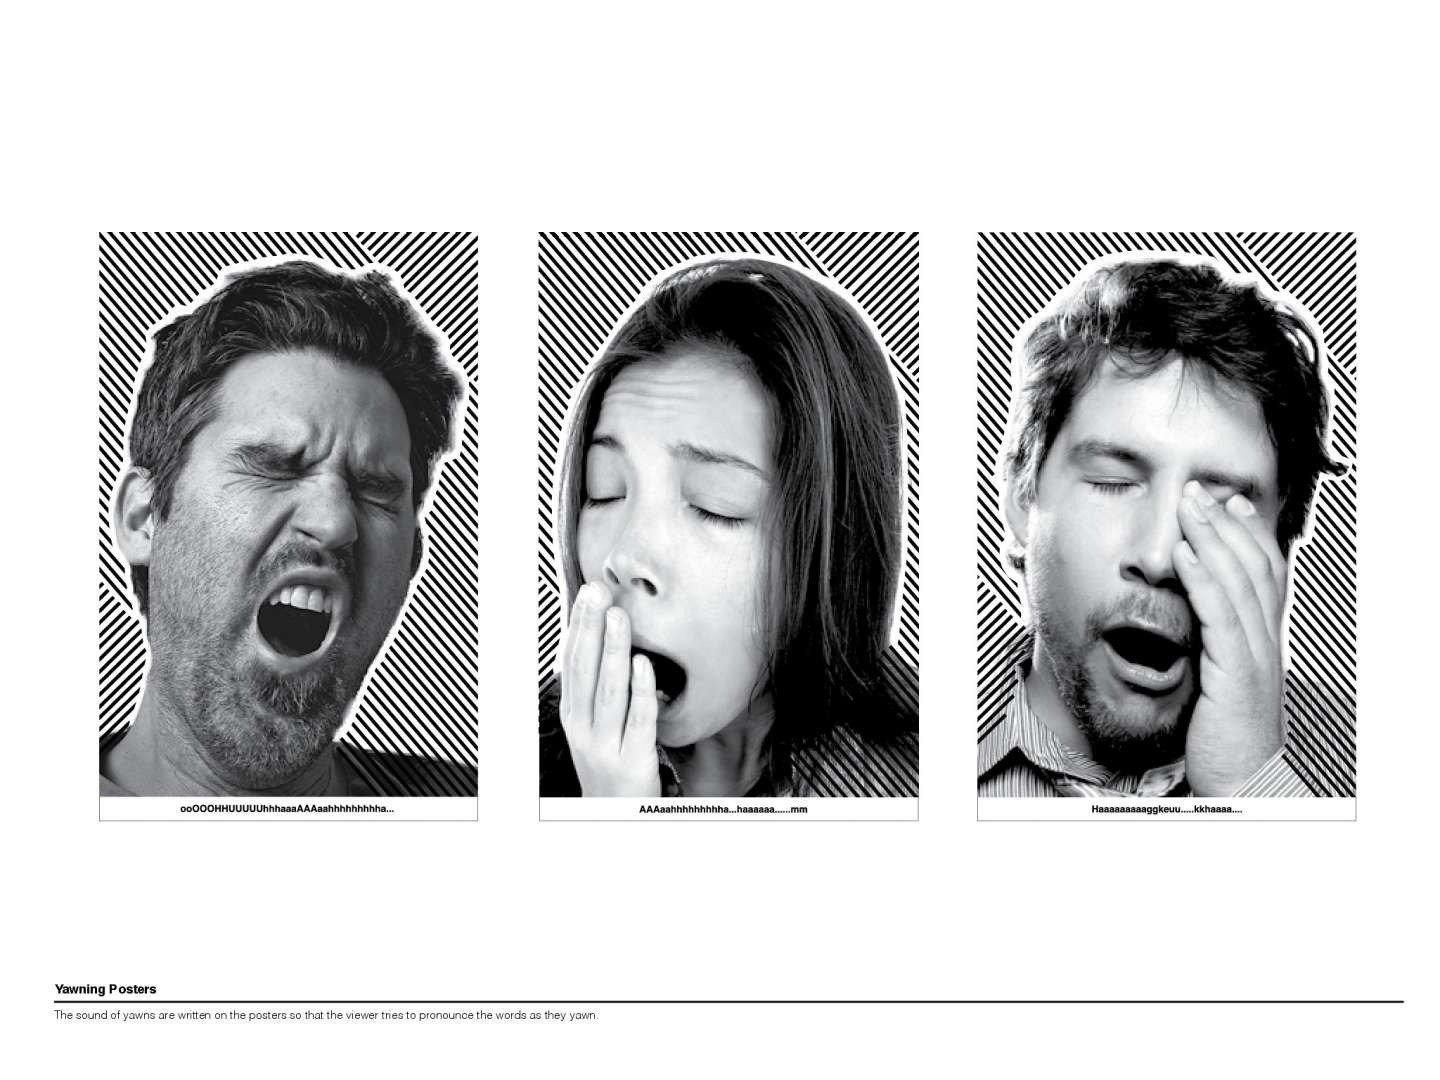 Yawning Posters